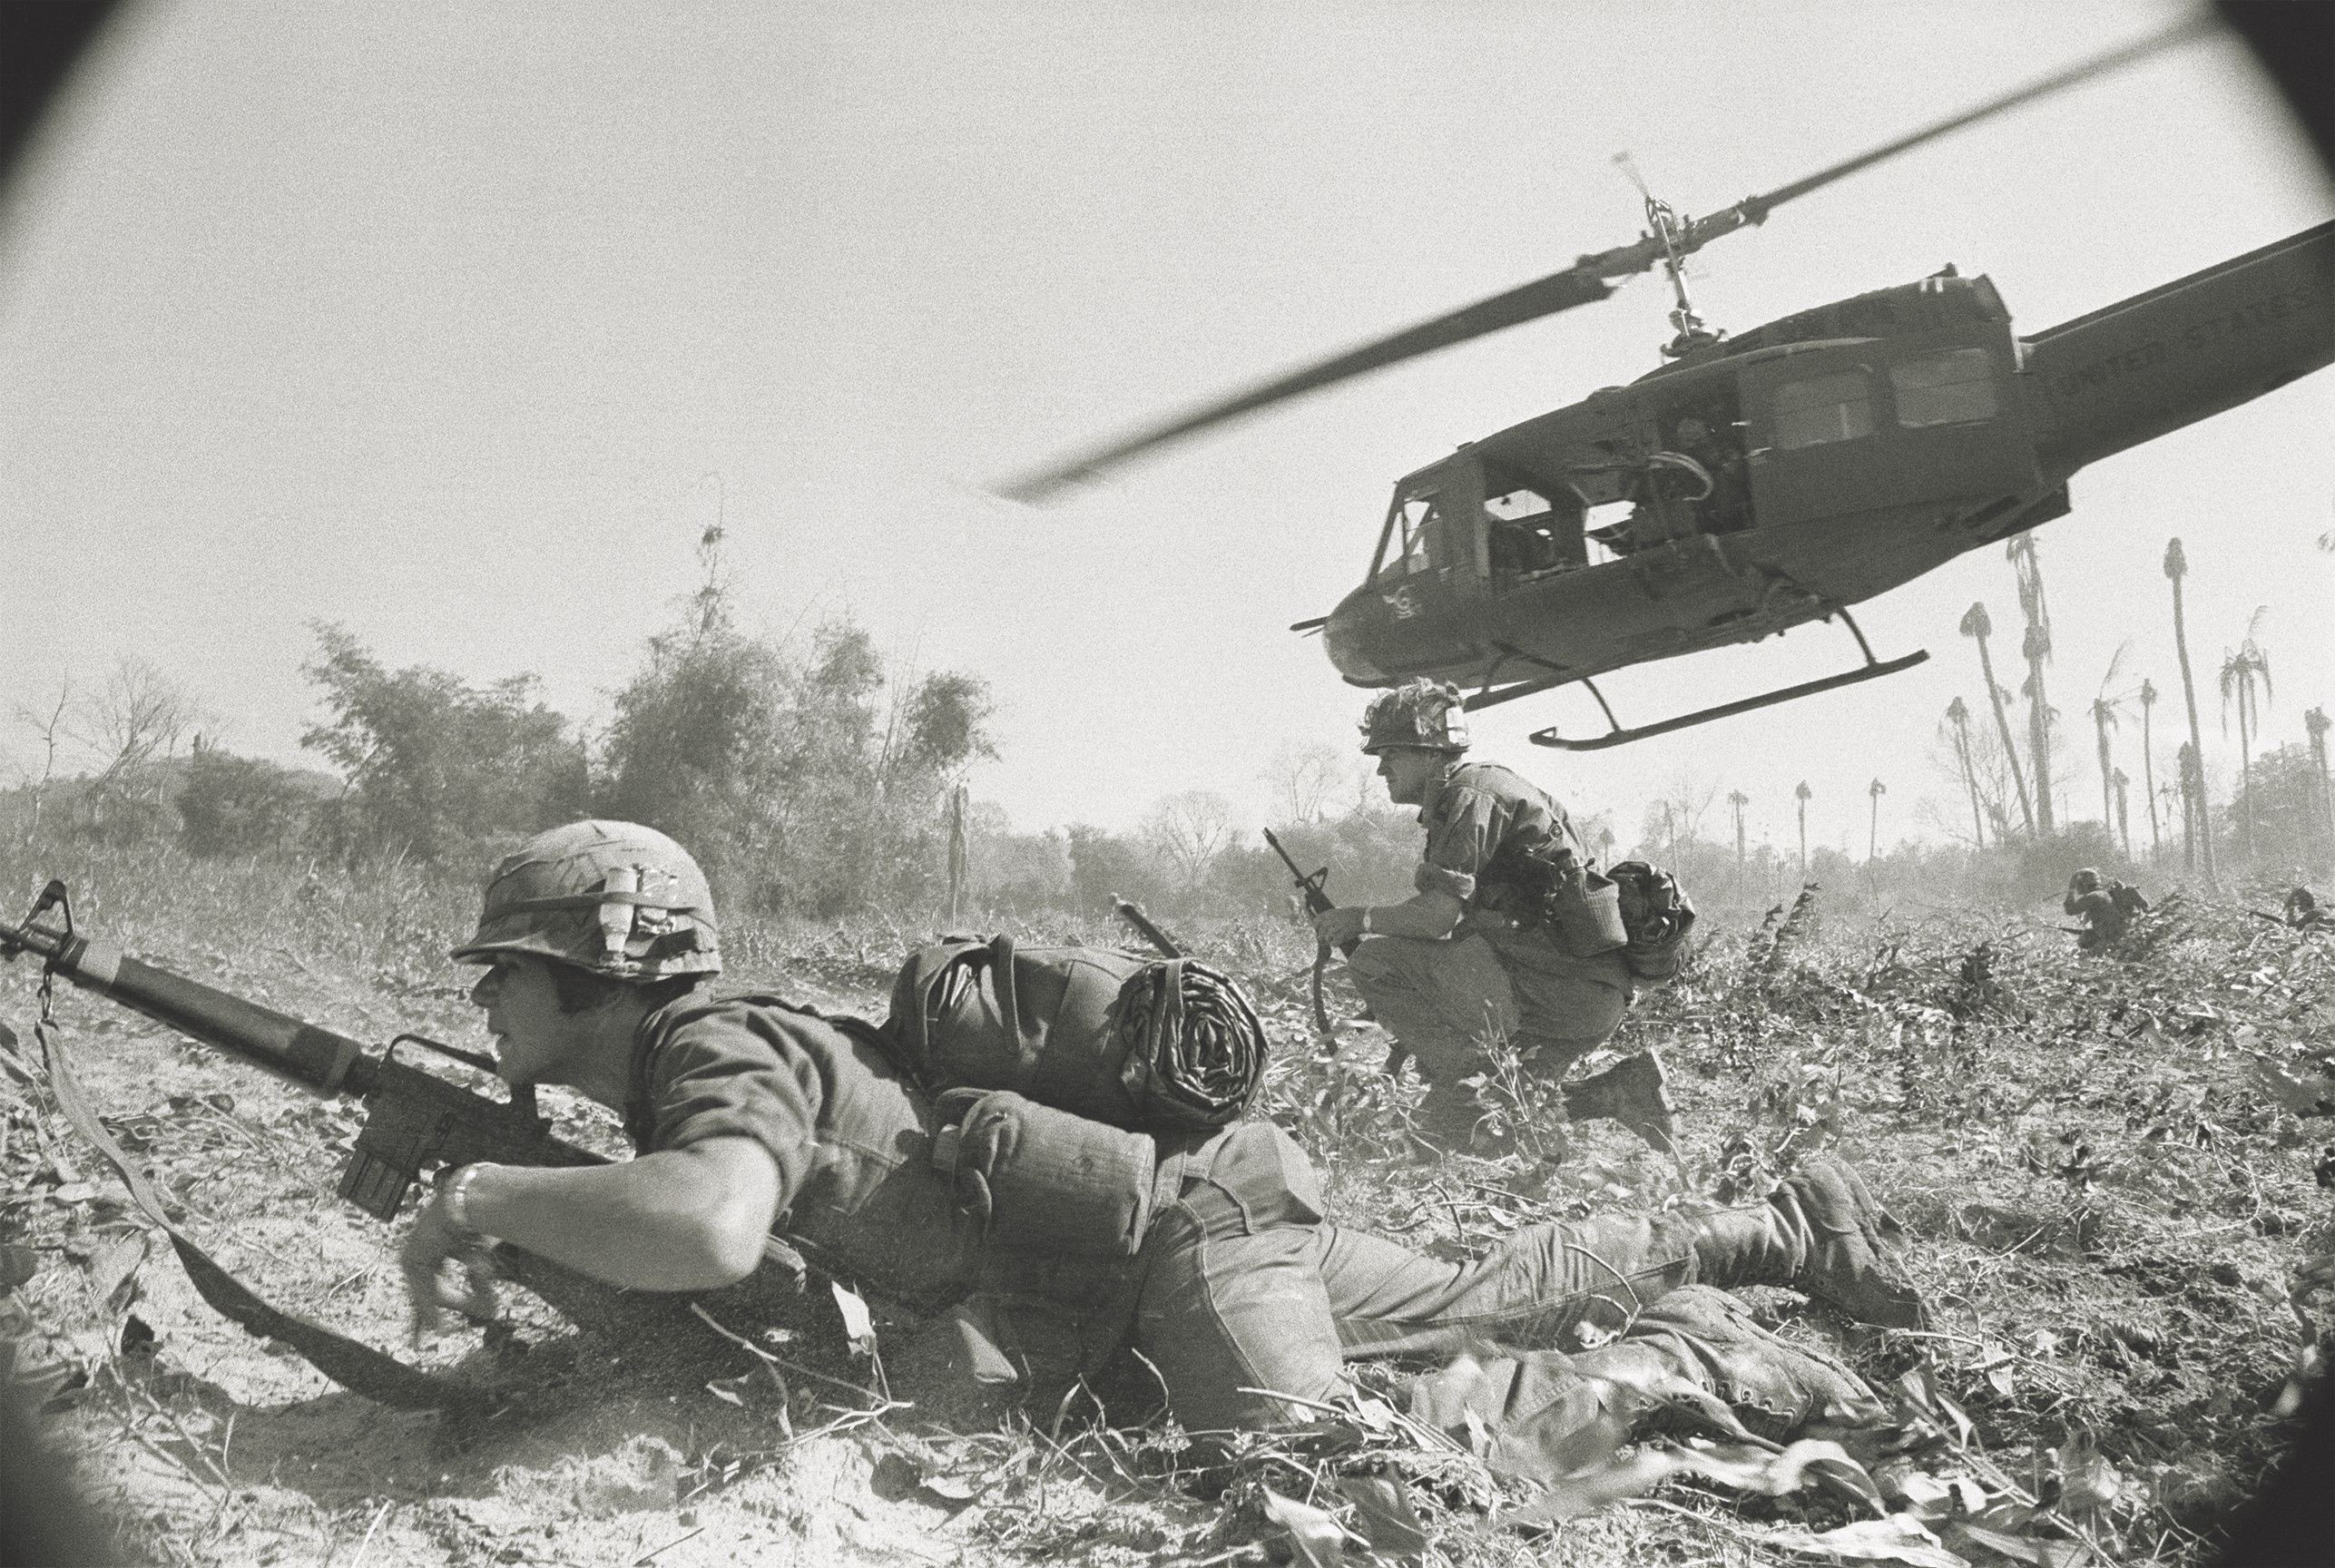 After a helicopter landing in February 1966 in South Vietnam’s Central Highlands, soldiers of the 1st Cavalry Division (Airmobile) brave enemy fire during Operation Eagle’s Claw to advance on communist forces in traditional infantry combat. (Bettmann/Getty Images)